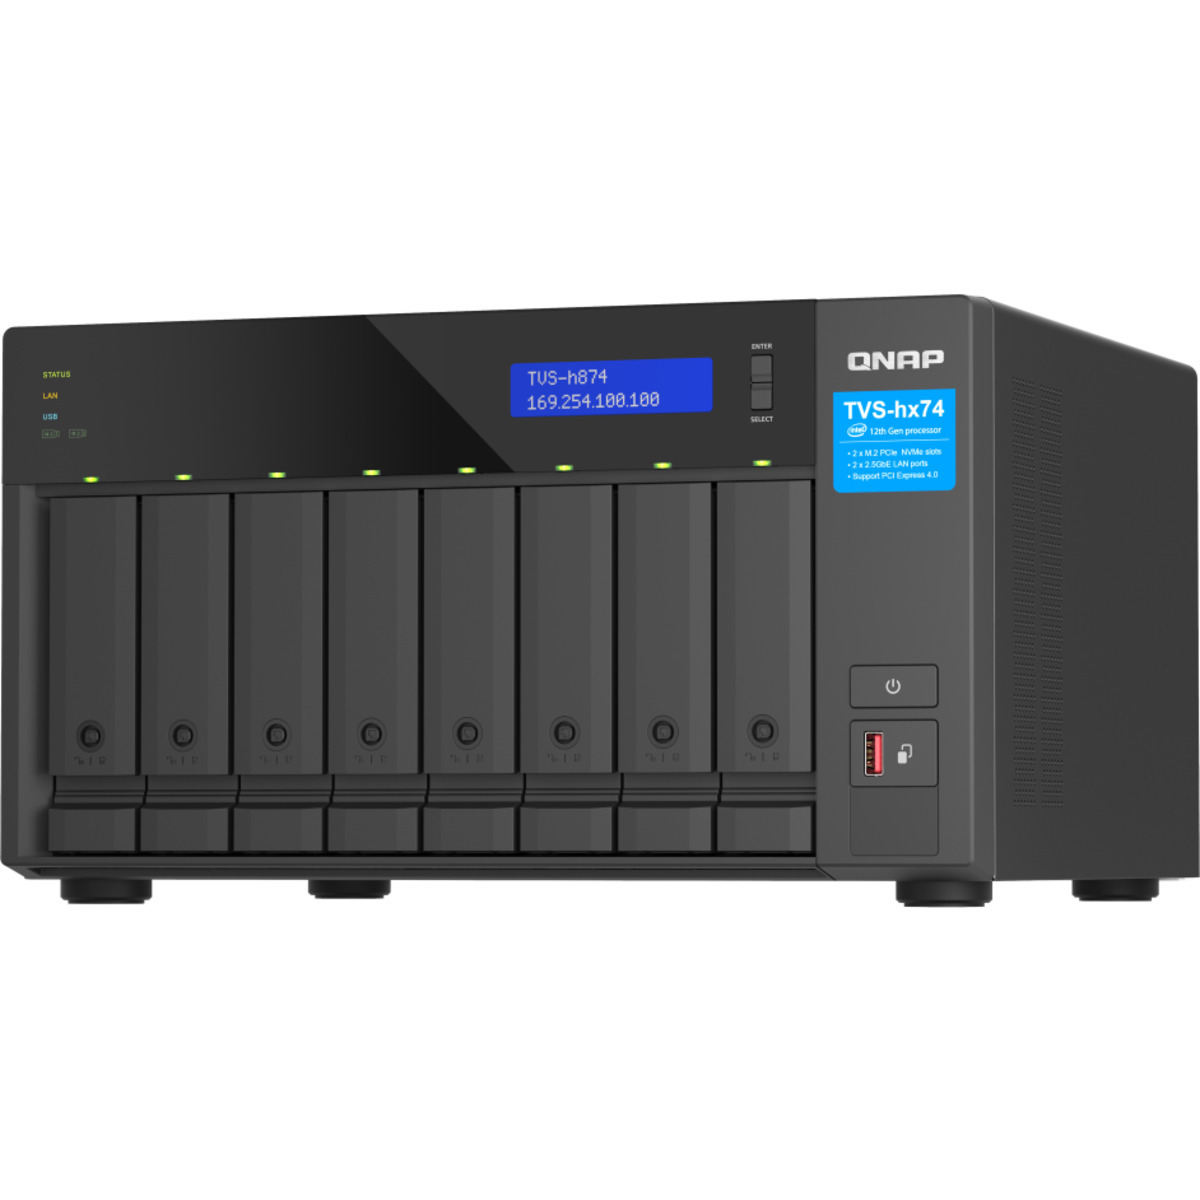 QNAP TVS-h874 Core i5 30tb 8-Bay Desktop Multimedia / Power User / Business NAS - Network Attached Storage Device 5x6tb Western Digital Gold WD6003FRYZ 3.5 7200rpm SATA 6Gb/s HDD ENTERPRISE Class Drives Installed - Burn-In Tested TVS-h874 Core i5